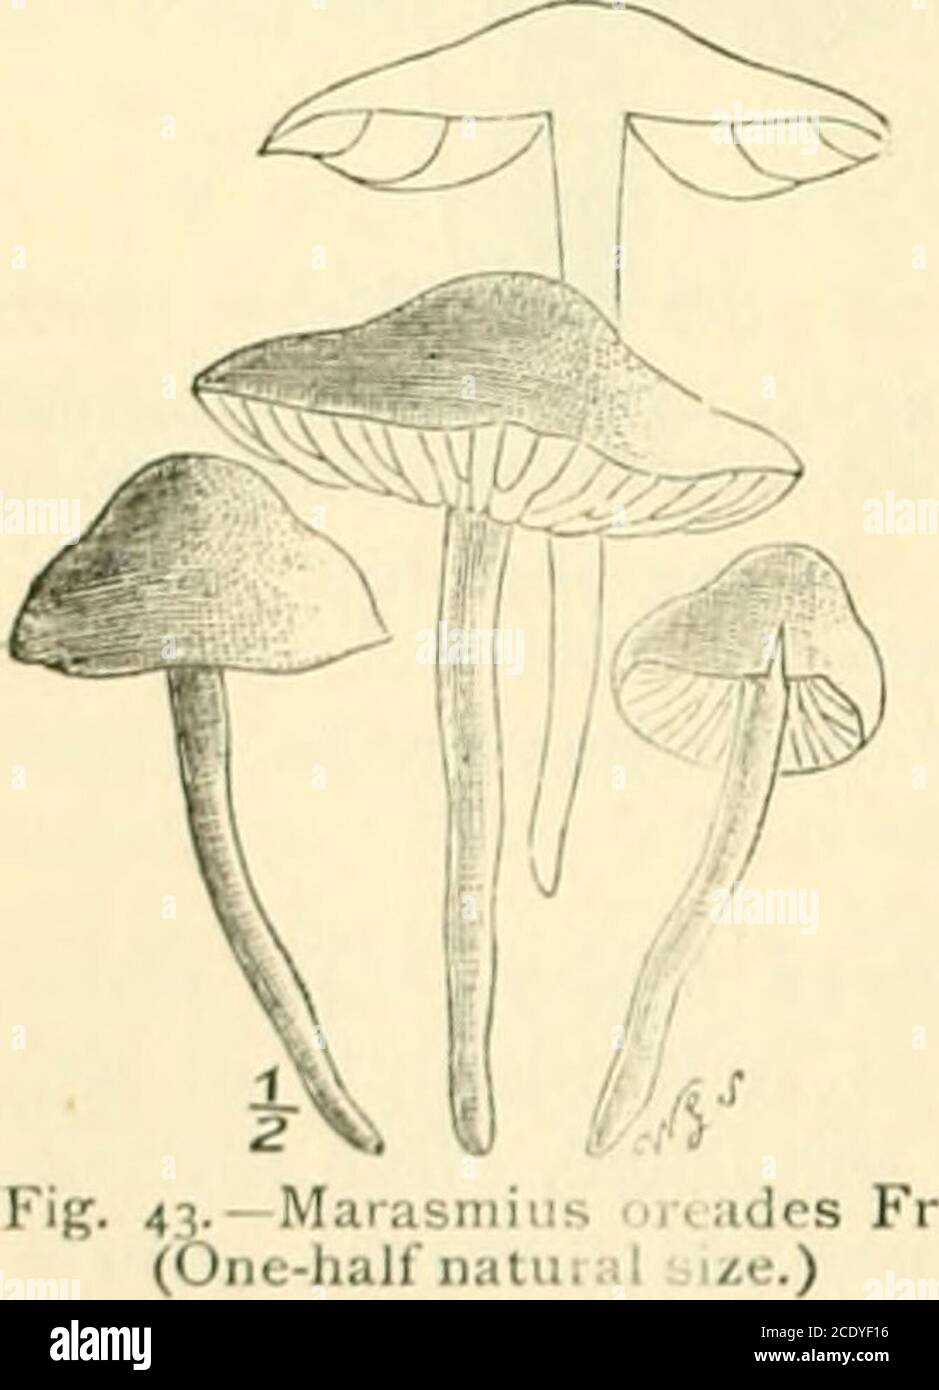 . Guide to Sowerby's models of British fungi in the Department of Botany, British Museum (Natural History) . ckened at both ends, red-brown,paler at the apex. M. purrcus is frequent in woods, especially among oak leaves;its strong odour of garlic is characteristic, but not peculiar, as twoother species possess it. The odour passes away in drying. 113. Marasmius oreades Fr. The Fairy-ring Champignon.—Pileus at first pale livid buff in colour, with a darker disc, becoming paler when dry, hygrophanous, convex,then plane, somewhat umbonate, even,smooth, slightly striate at the marginwhen moist; gi Stock Photo